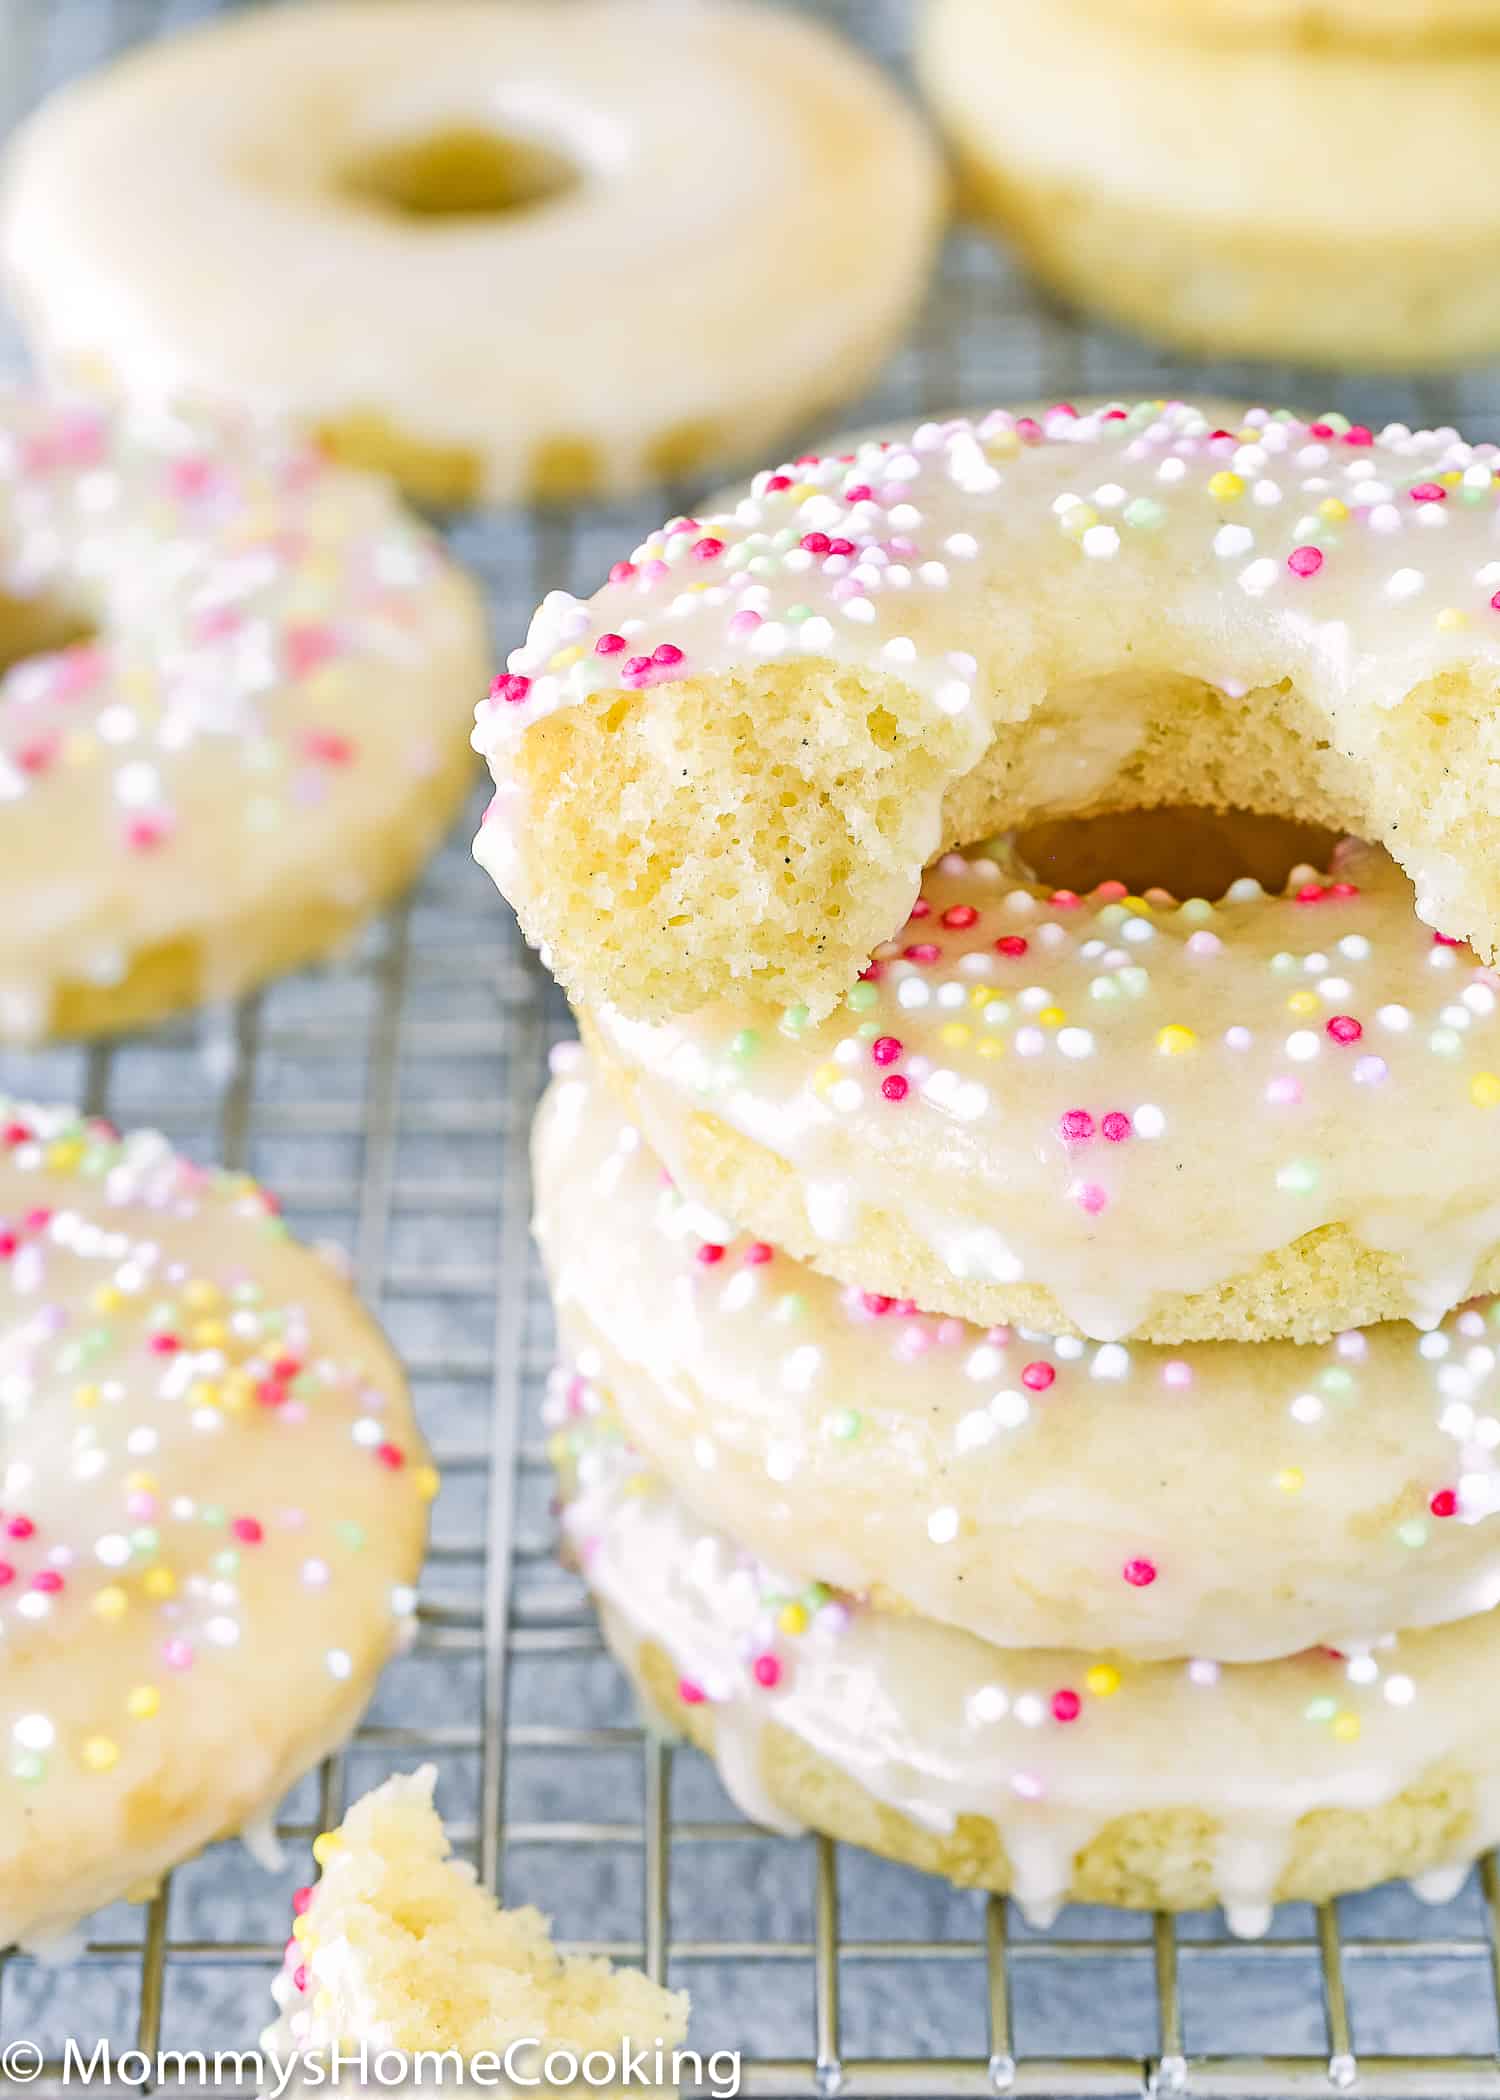 A stack of three eggless donuts with one on top that's cut in half, showing the fluffy interior.